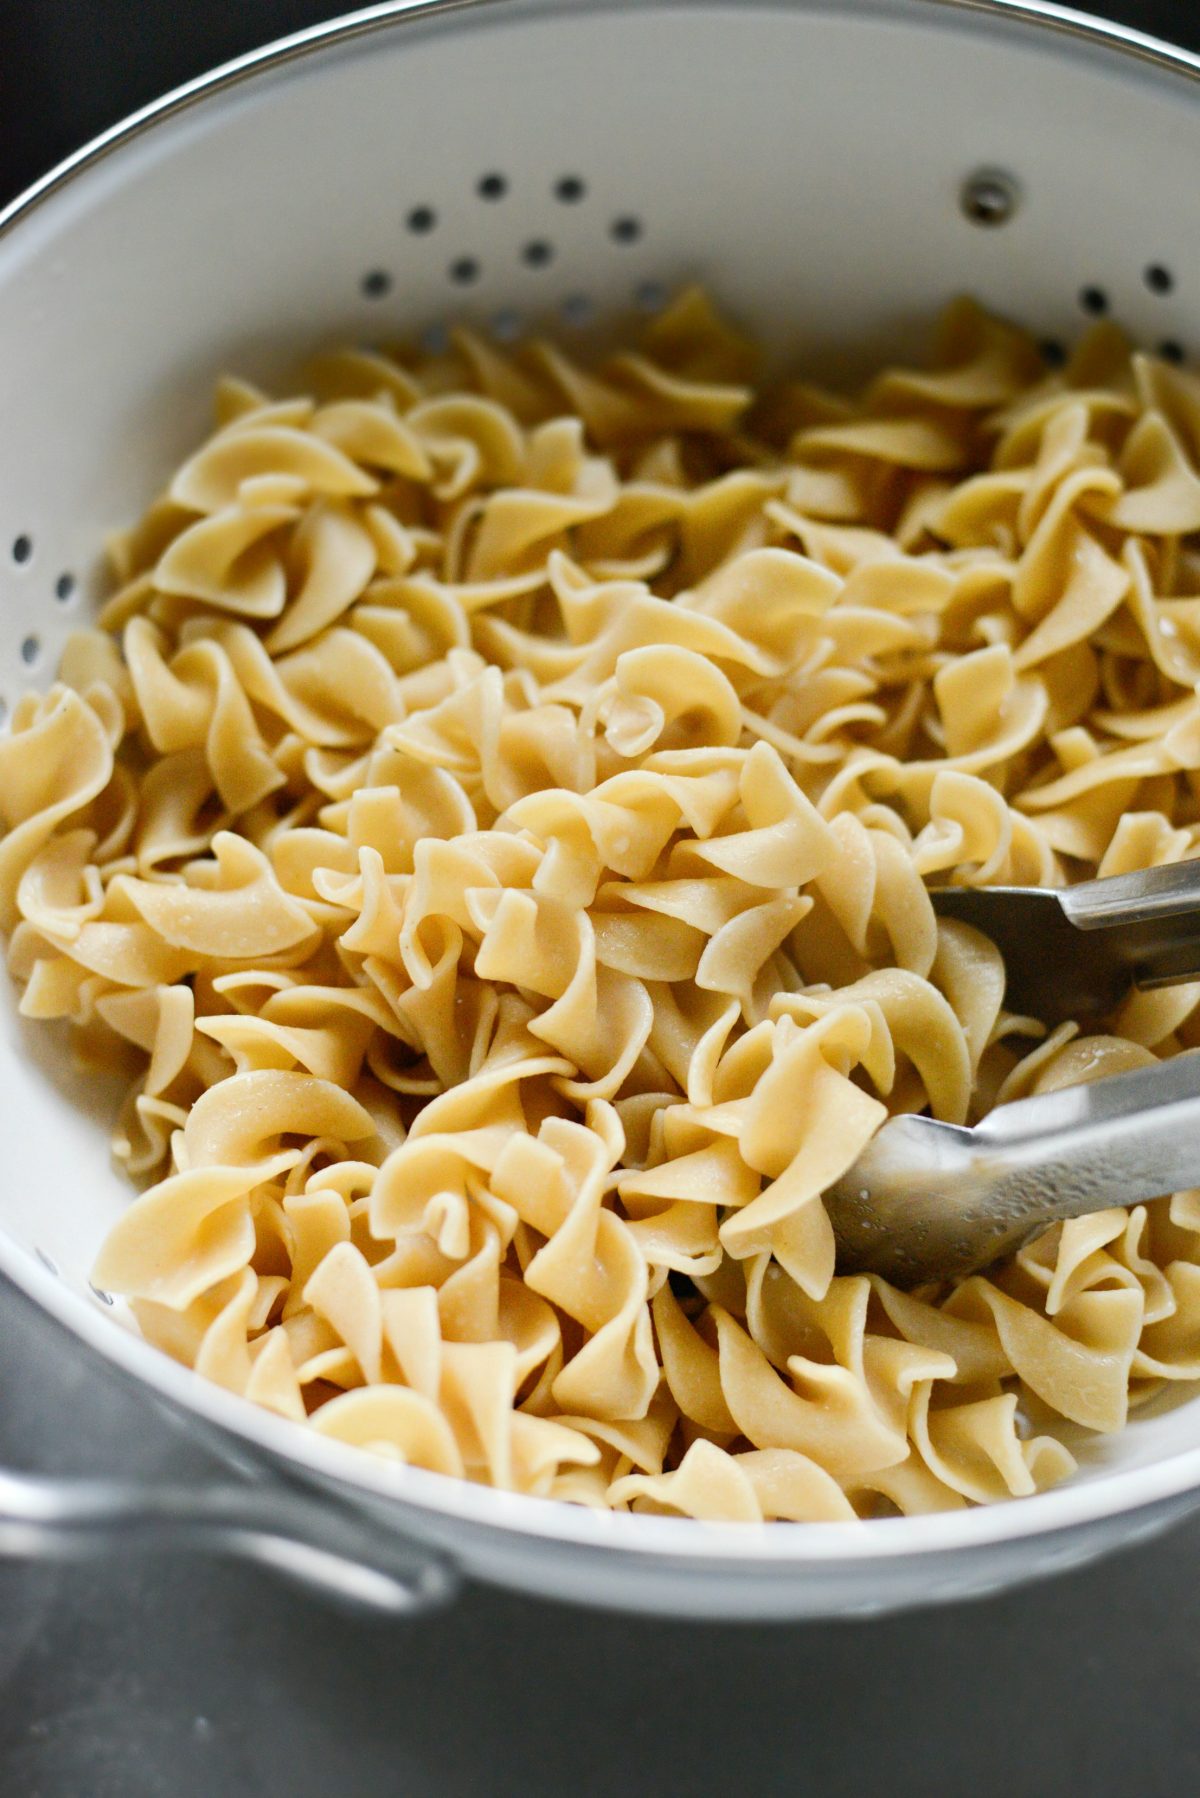 cook and drain egg noodles